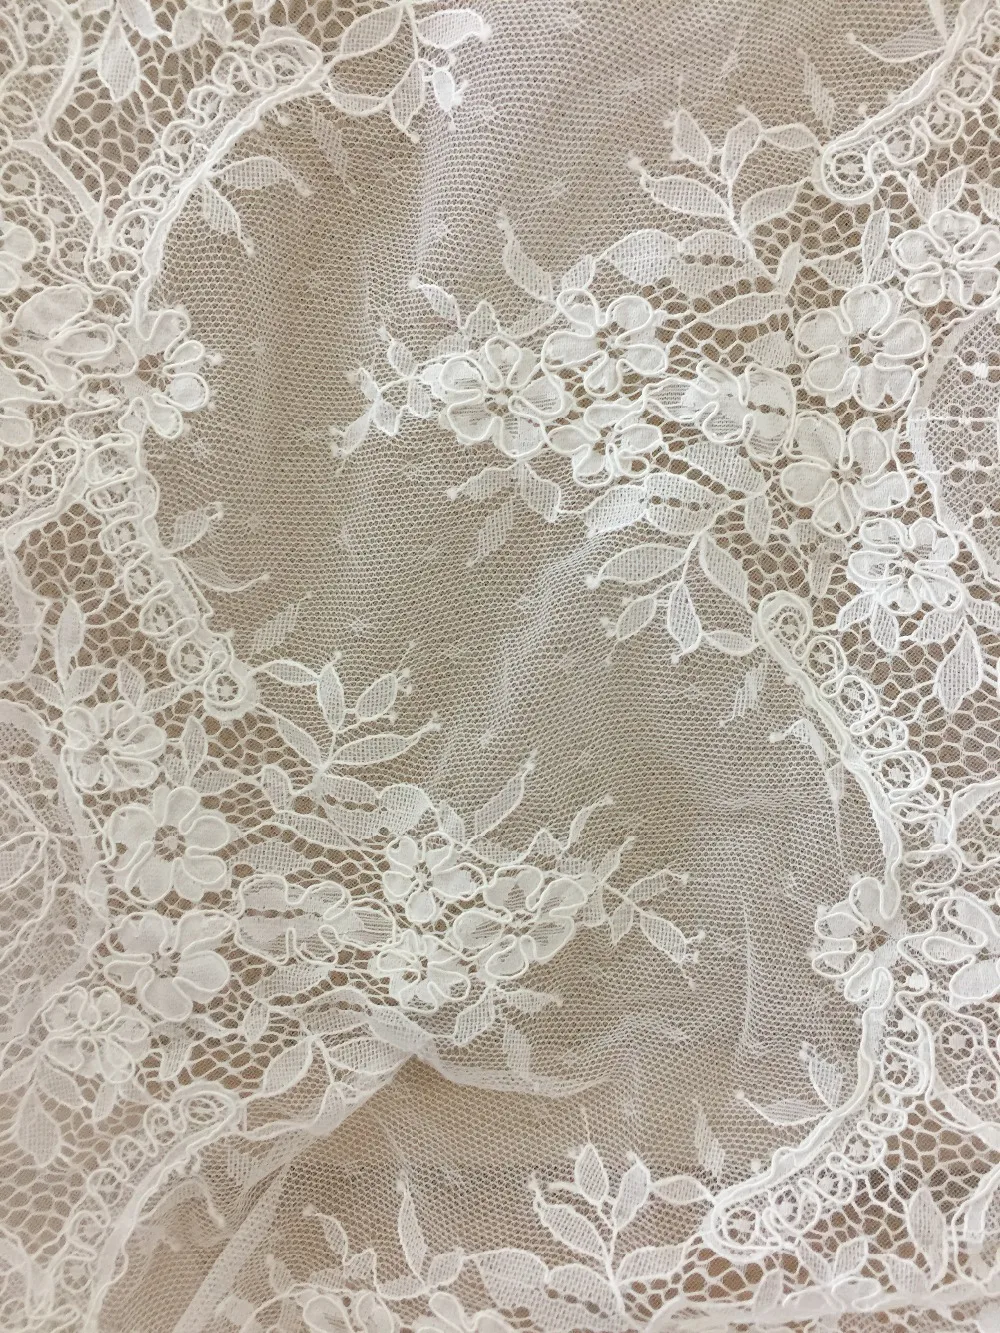 Top Quality 3 Yards French Alencon Lace Fabric Cord Floral Embroidery Scalloped Trim for Wedding Veils Shrug 40 cm wide